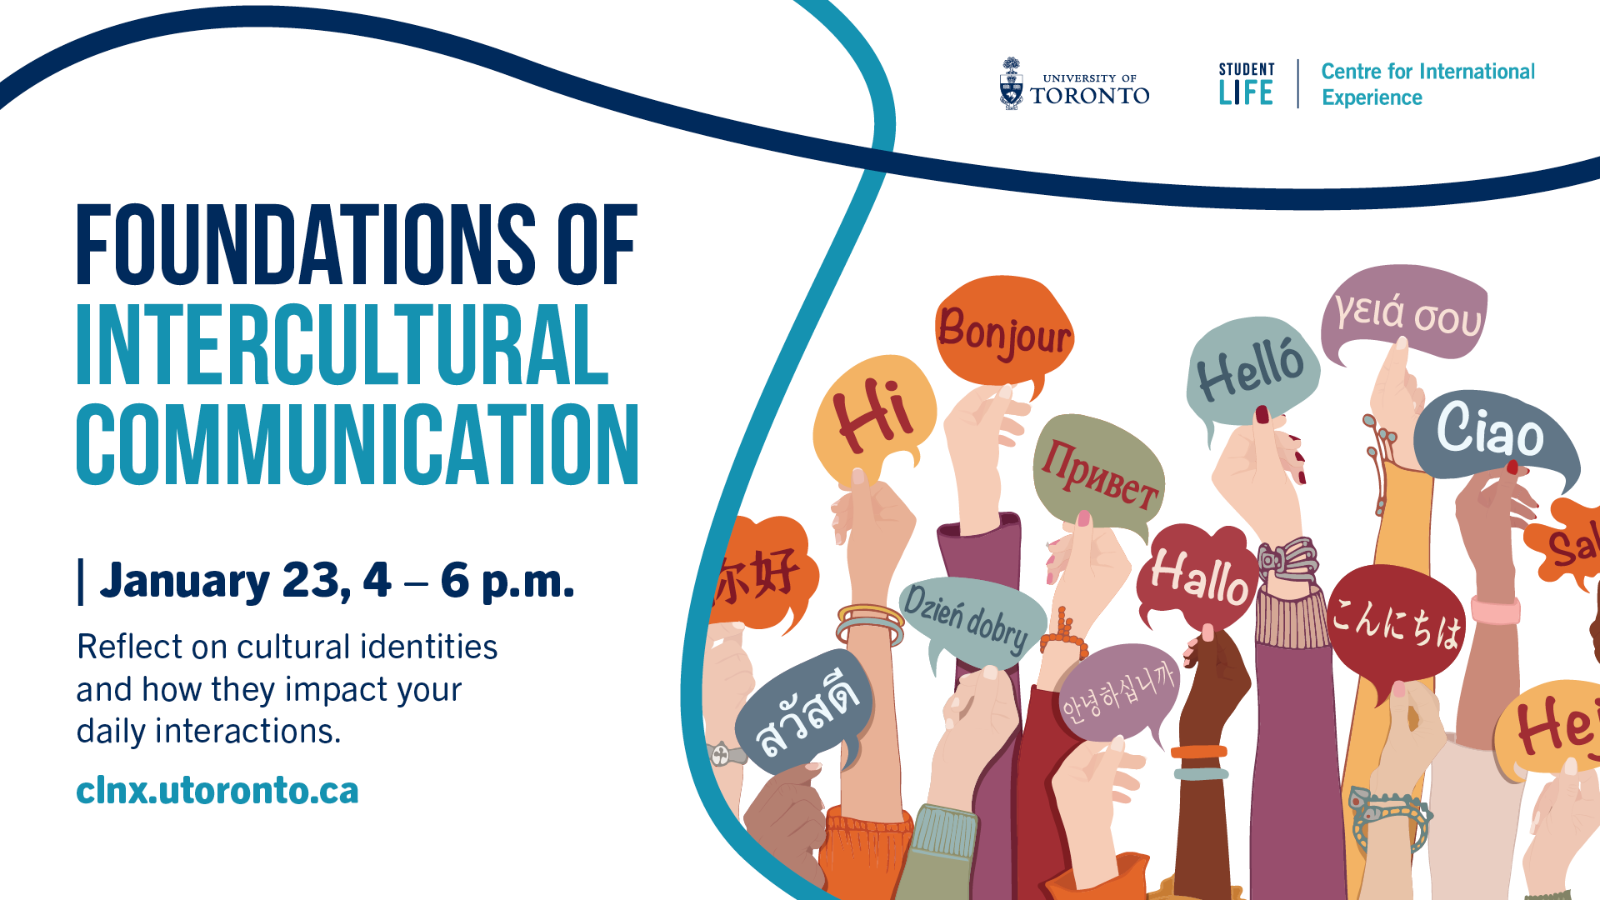 An image of "Hello" in different languages with text "Foundations of Intercultural Communication | January 23, 4-6 p,m. Reflect on cultural identities and how they impact your daily interactions. clnx.utoronto.ca". 